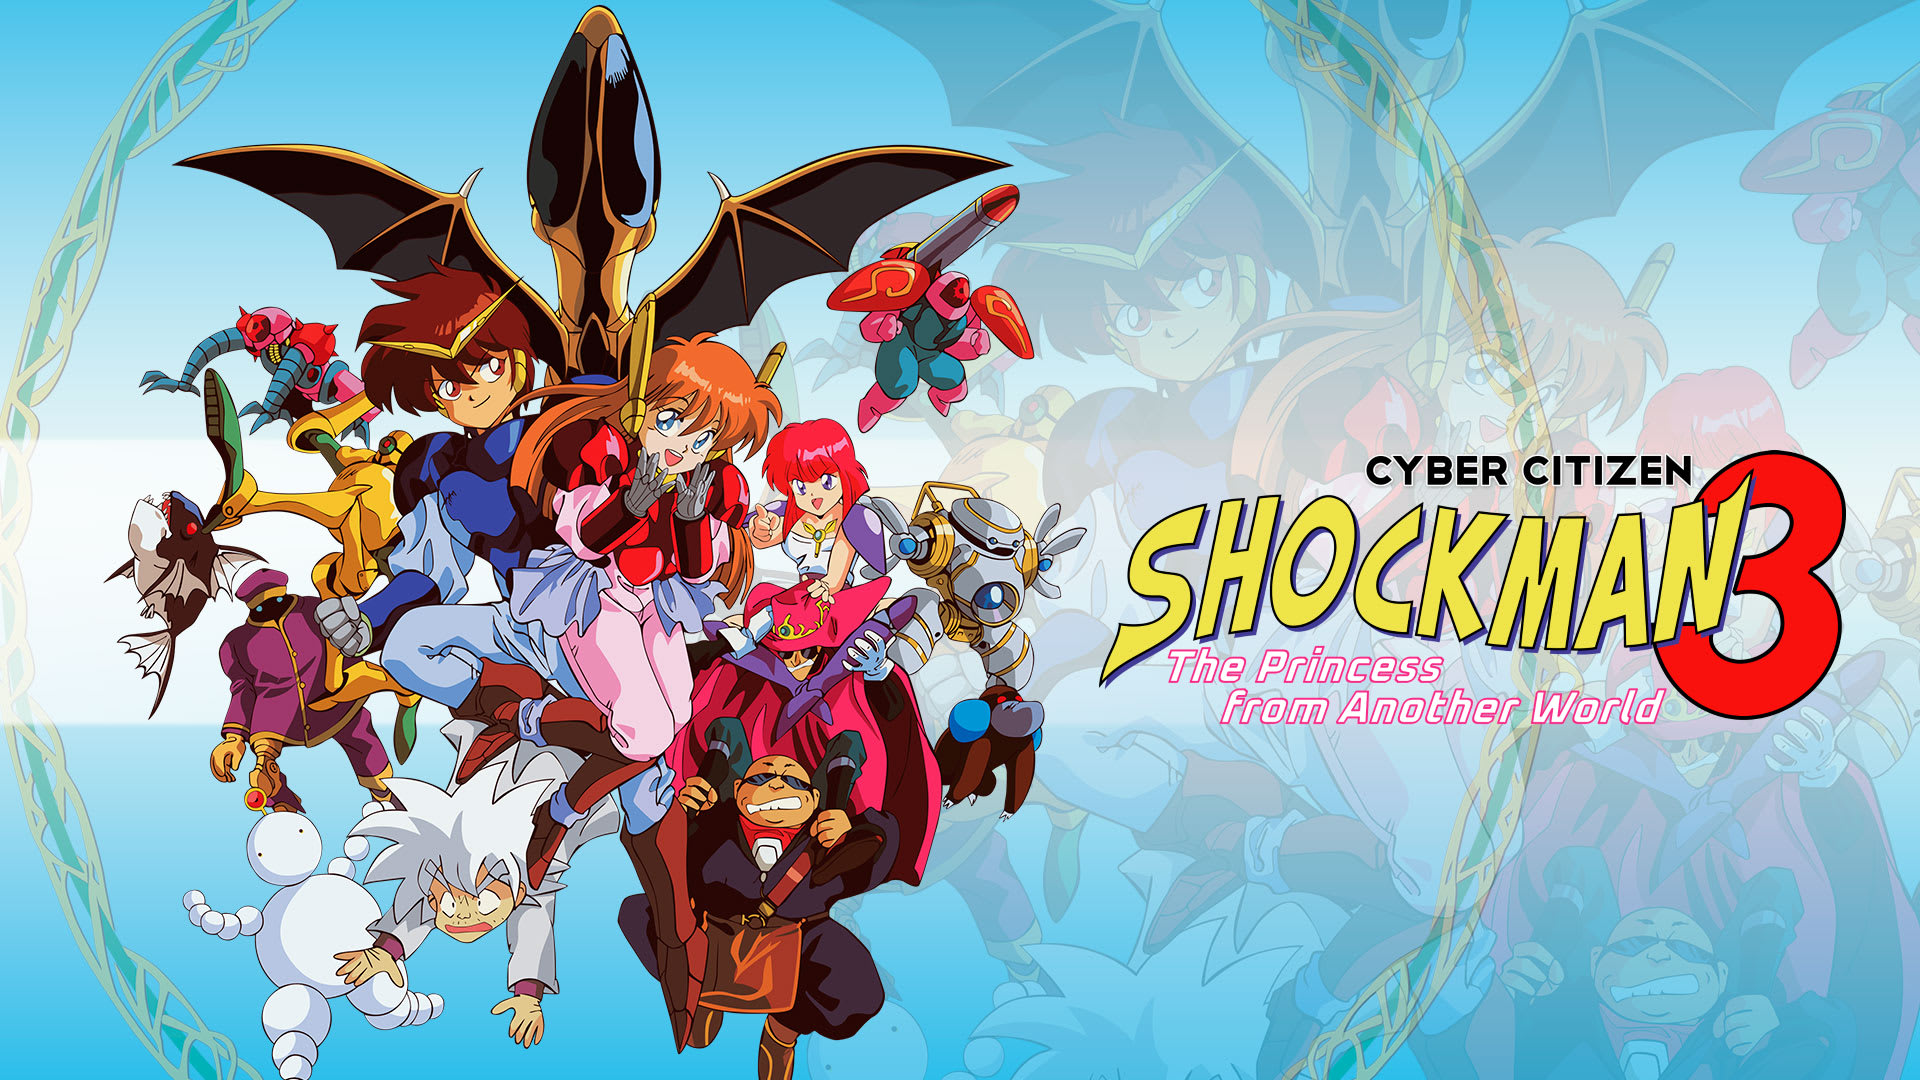 Cyber Citizen Shockman 3: The princess from another world 1